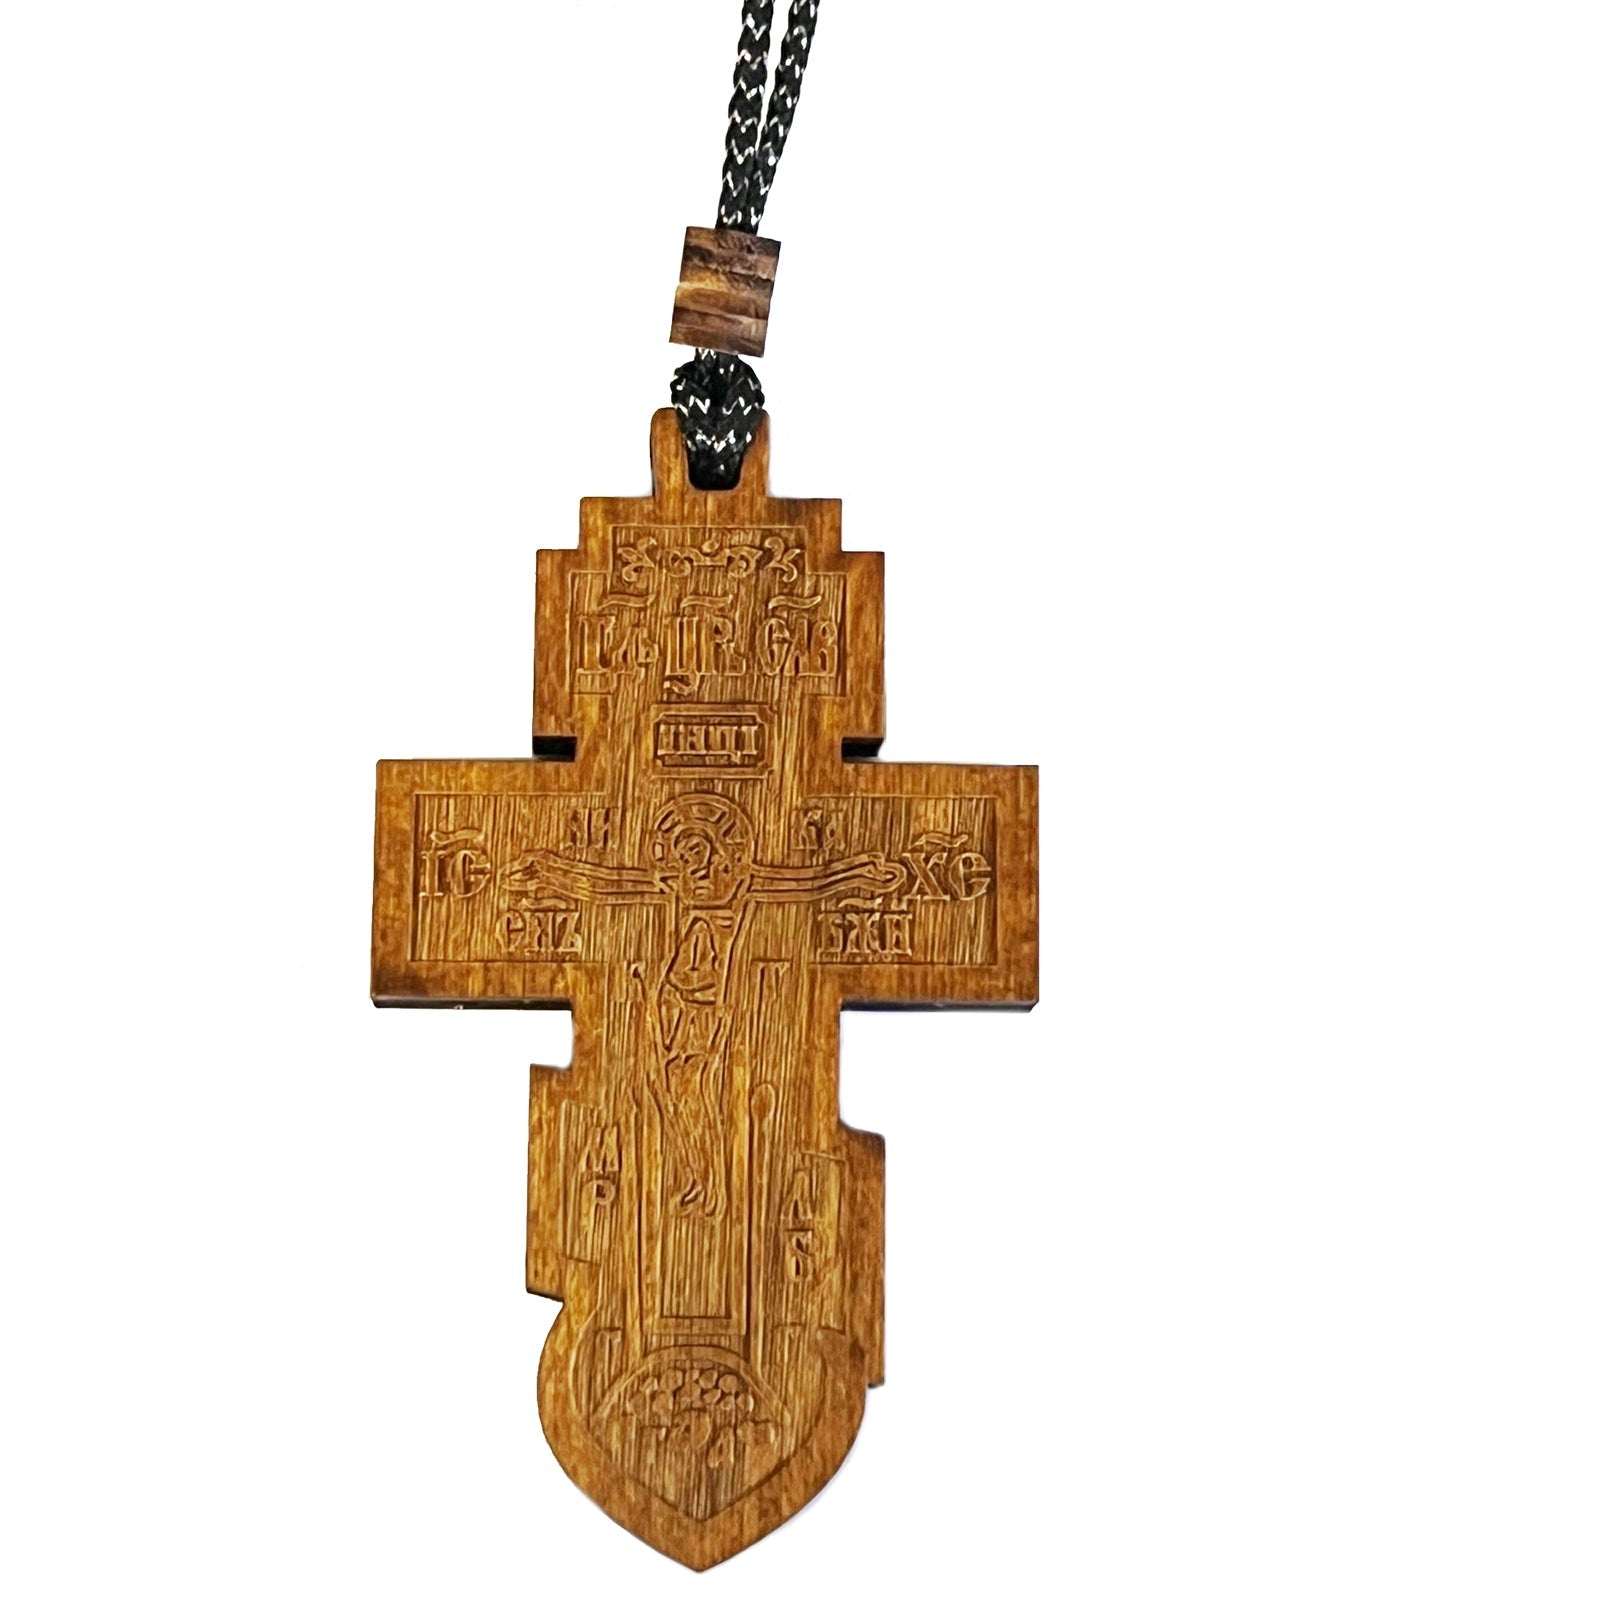 Wooden Car Cross-Save and Protect - Holy Cross Monastery